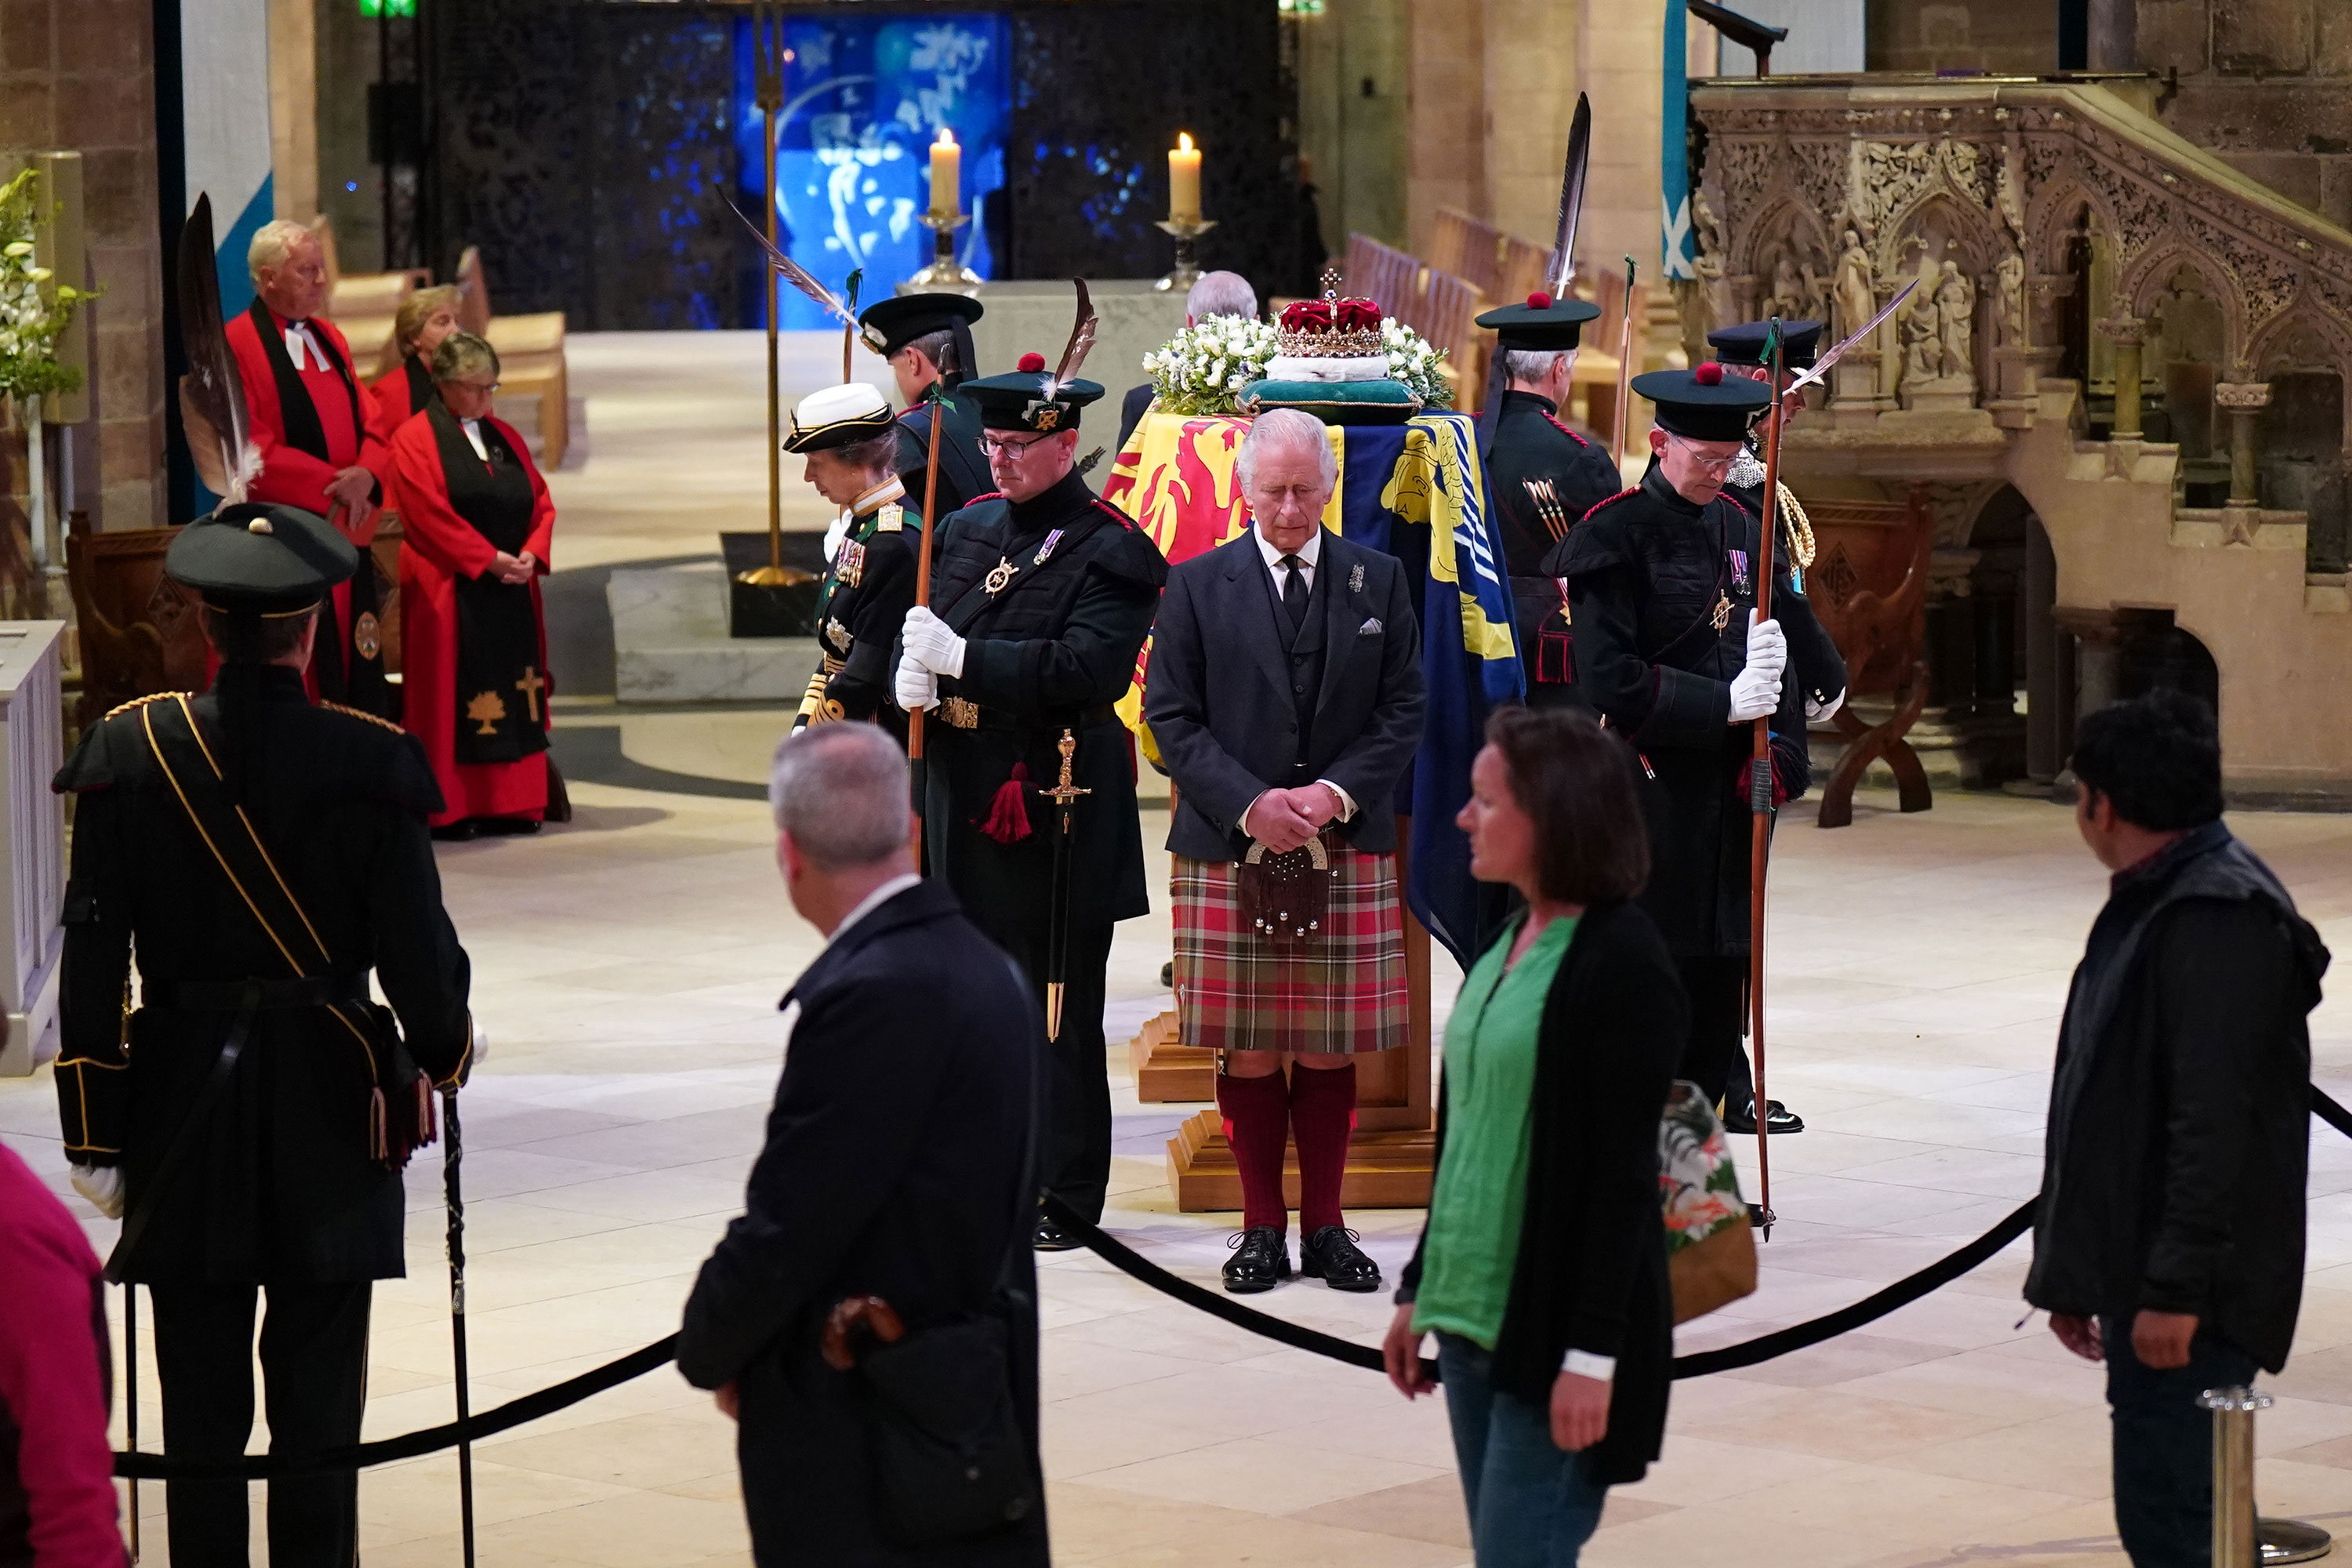 King Charles III holds vigil by the Queen's coffin alongside his siblings Princess Anne, Prince Edward and Prince Andrew at St. Giles' Cathedral in Edinburgh, Scotland, on Monday.